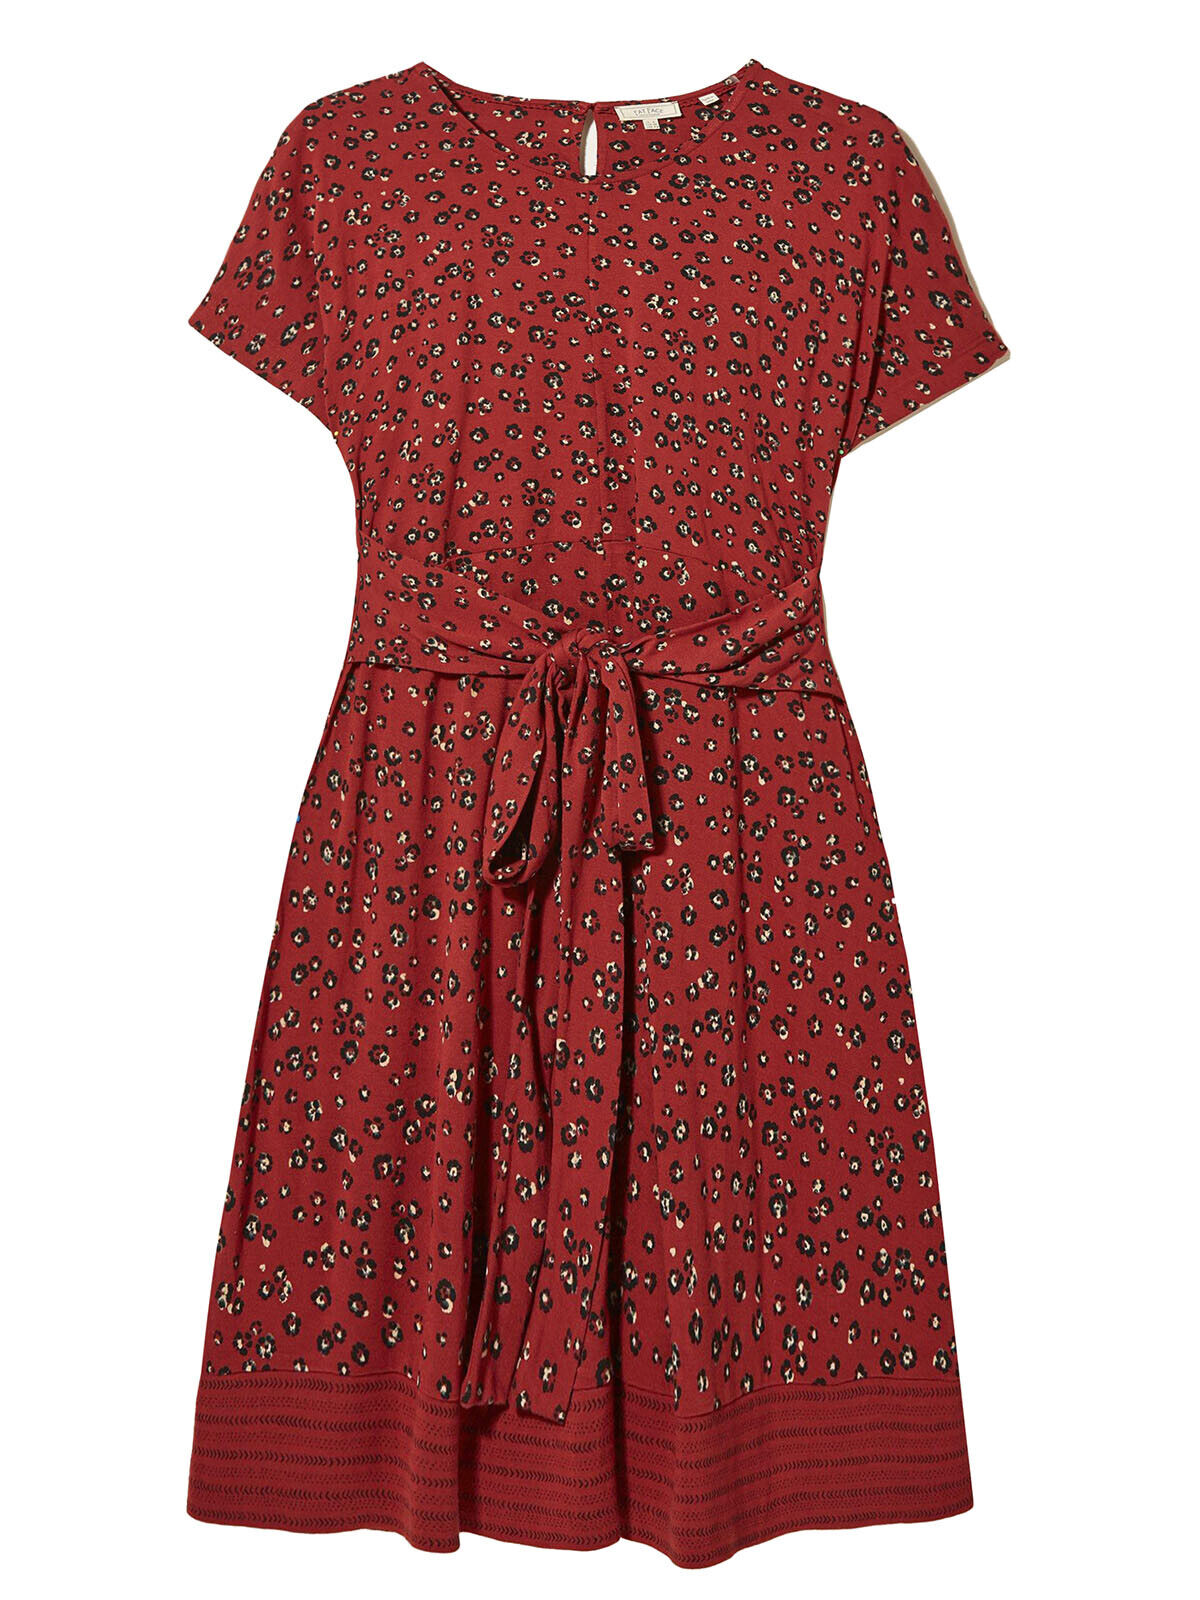 EX Fat Face Brick Red Erin Animal Jersey Dress Sizes 10, 12, 14, 16 RRP £46